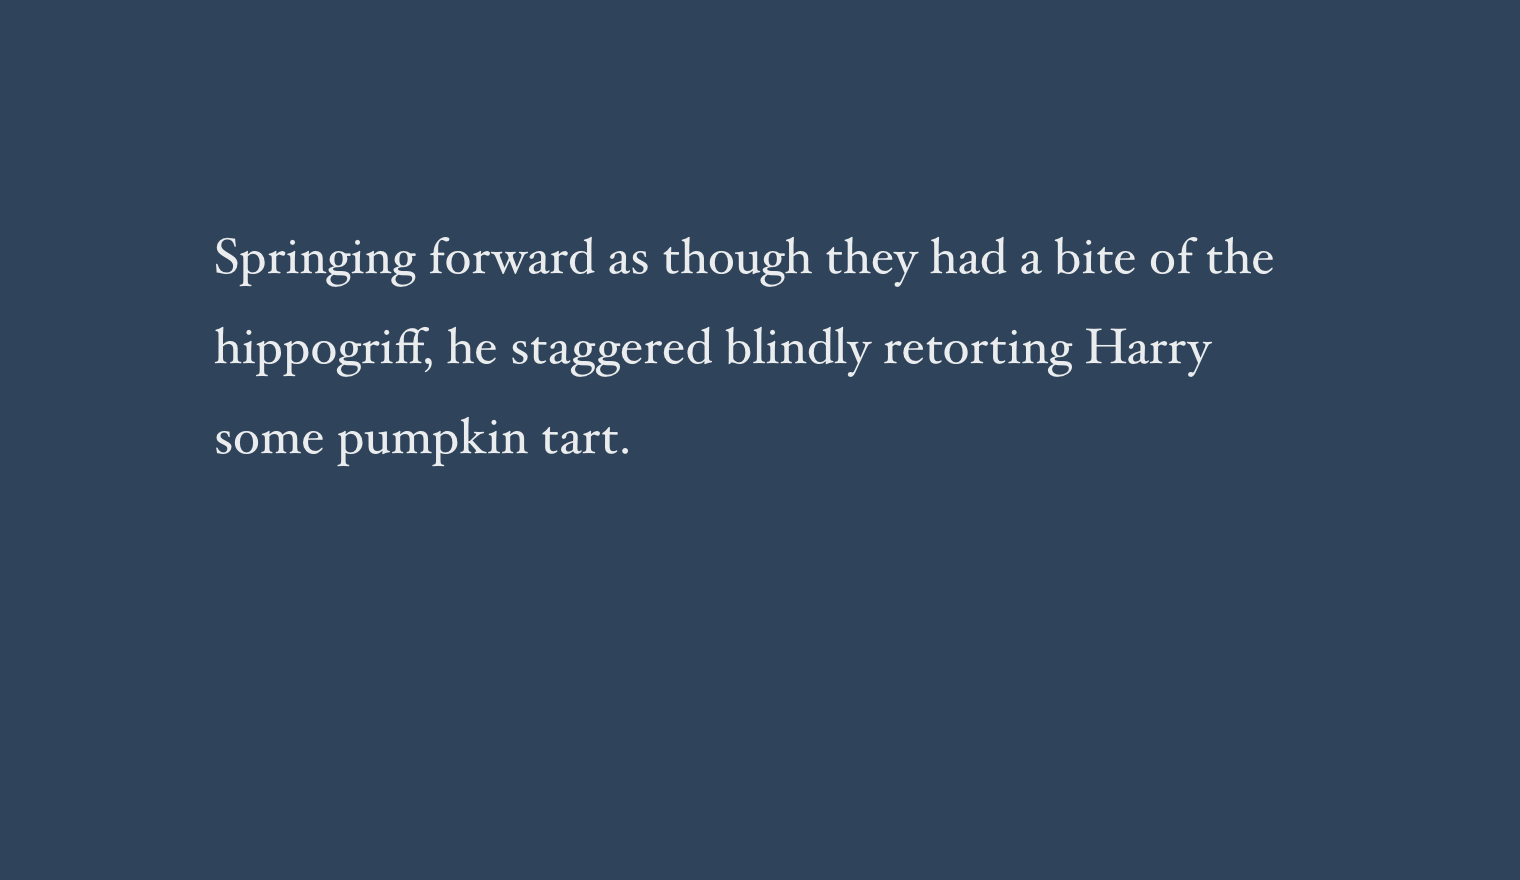 Springing forward as though they had a bite of the hippogriff, he staggered blindly retorting Harry some pumpkin tart.